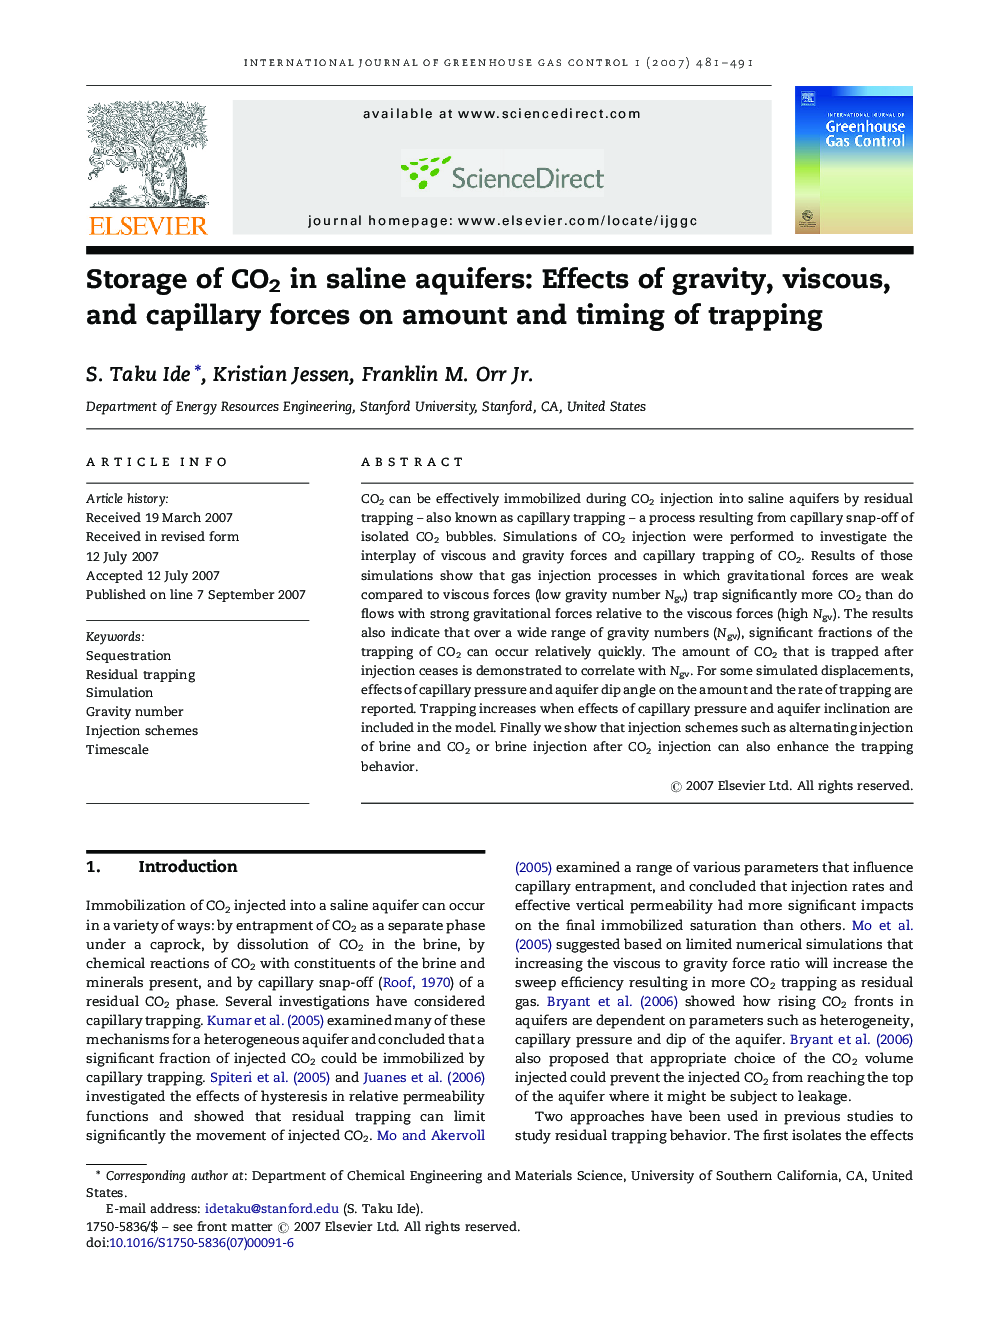 Storage of CO2 in saline aquifers: Effects of gravity, viscous, and capillary forces on amount and timing of trapping